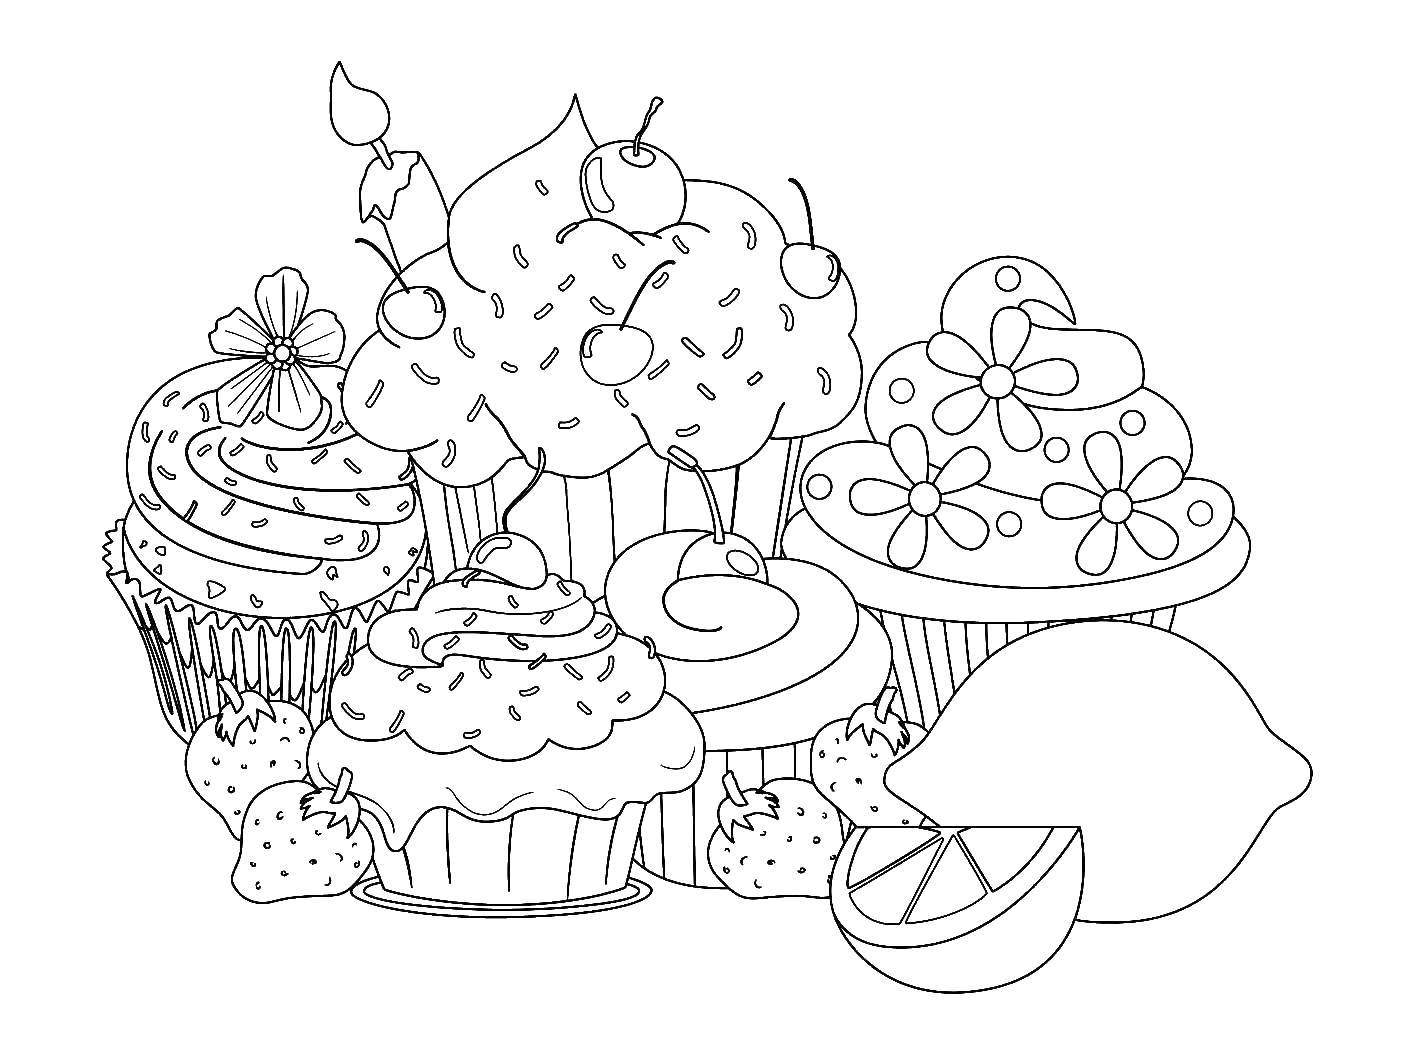 Coloring Berries and muffins. Category sweets. Tags:  cupcakes, lemon, strawberry, cherry.